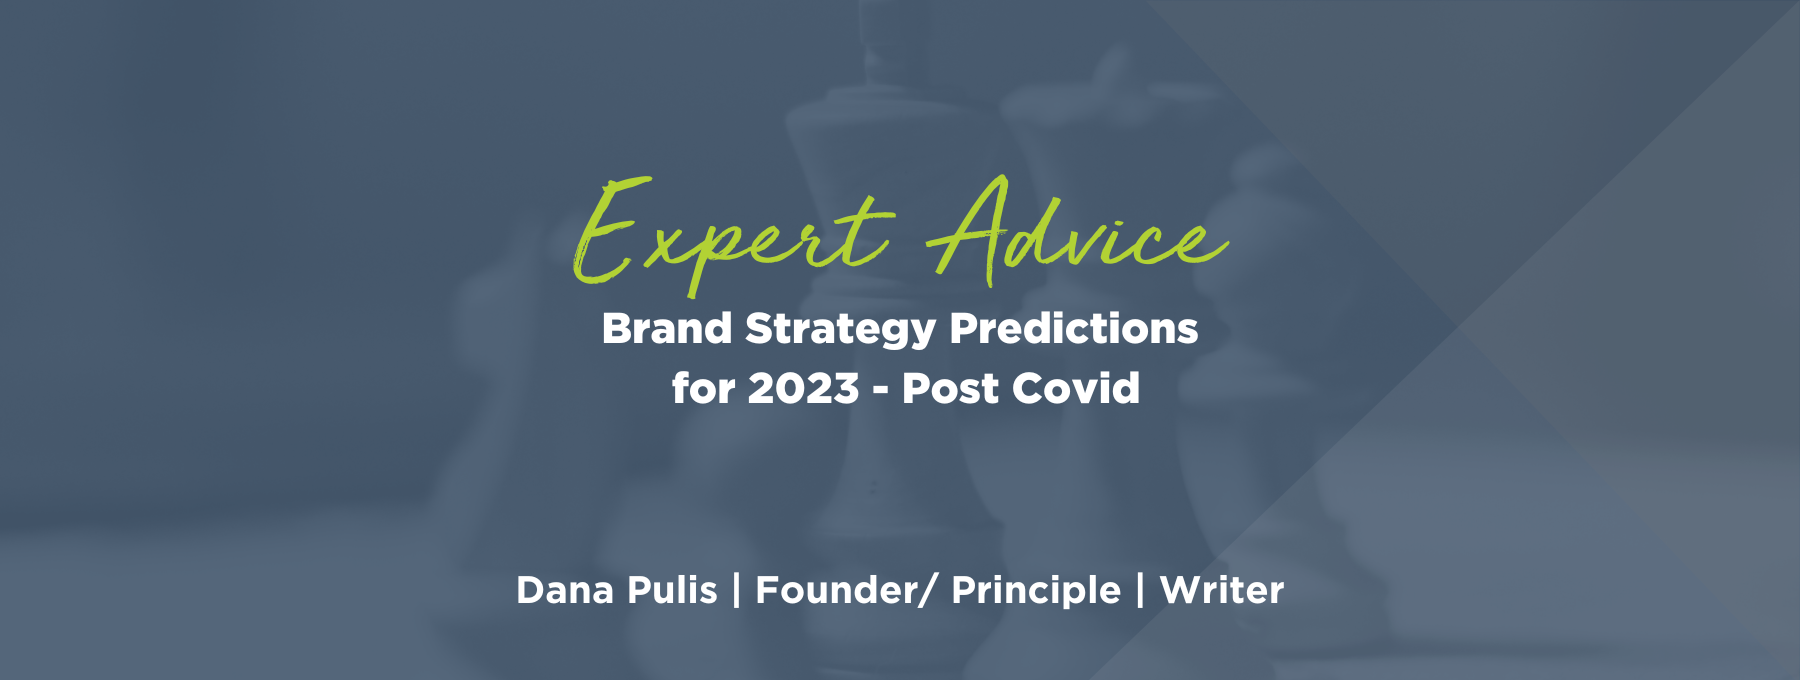 Brand predictions for 2023